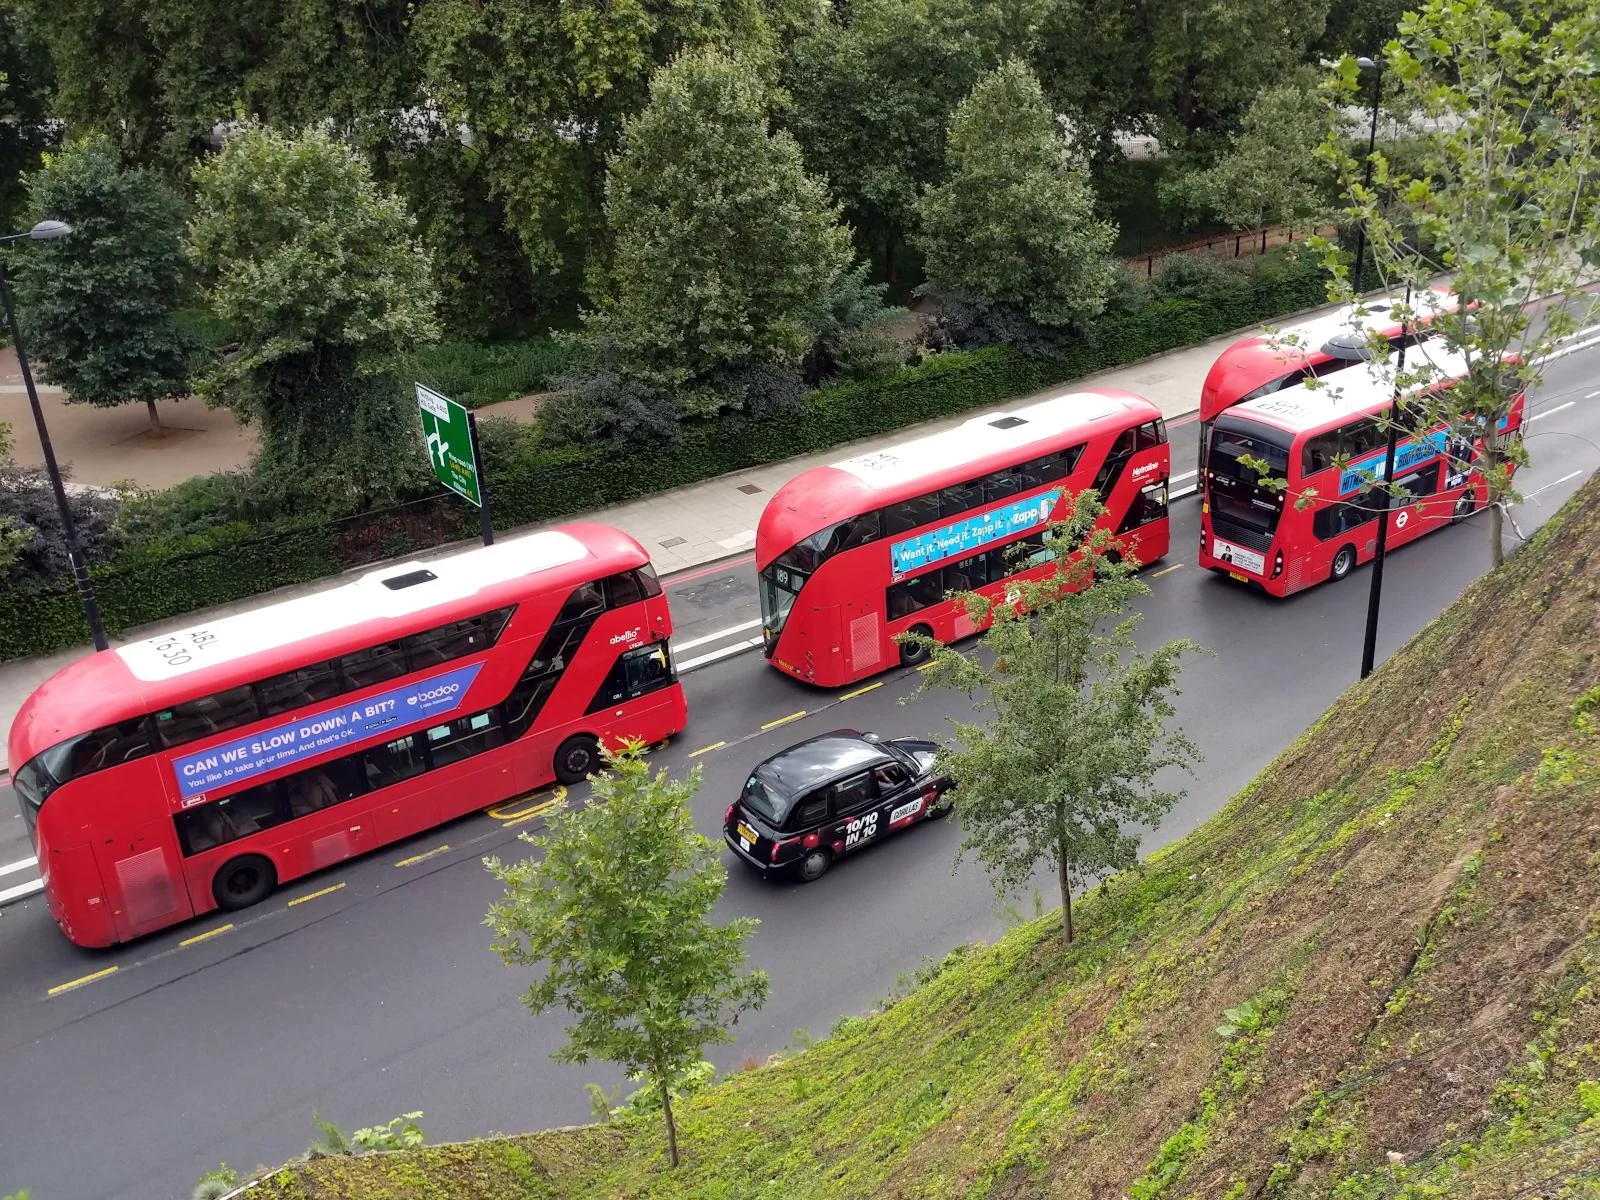 Looking down on buses and a taxi on the road, with the Mound in the foreground, and Hyde Park in the background